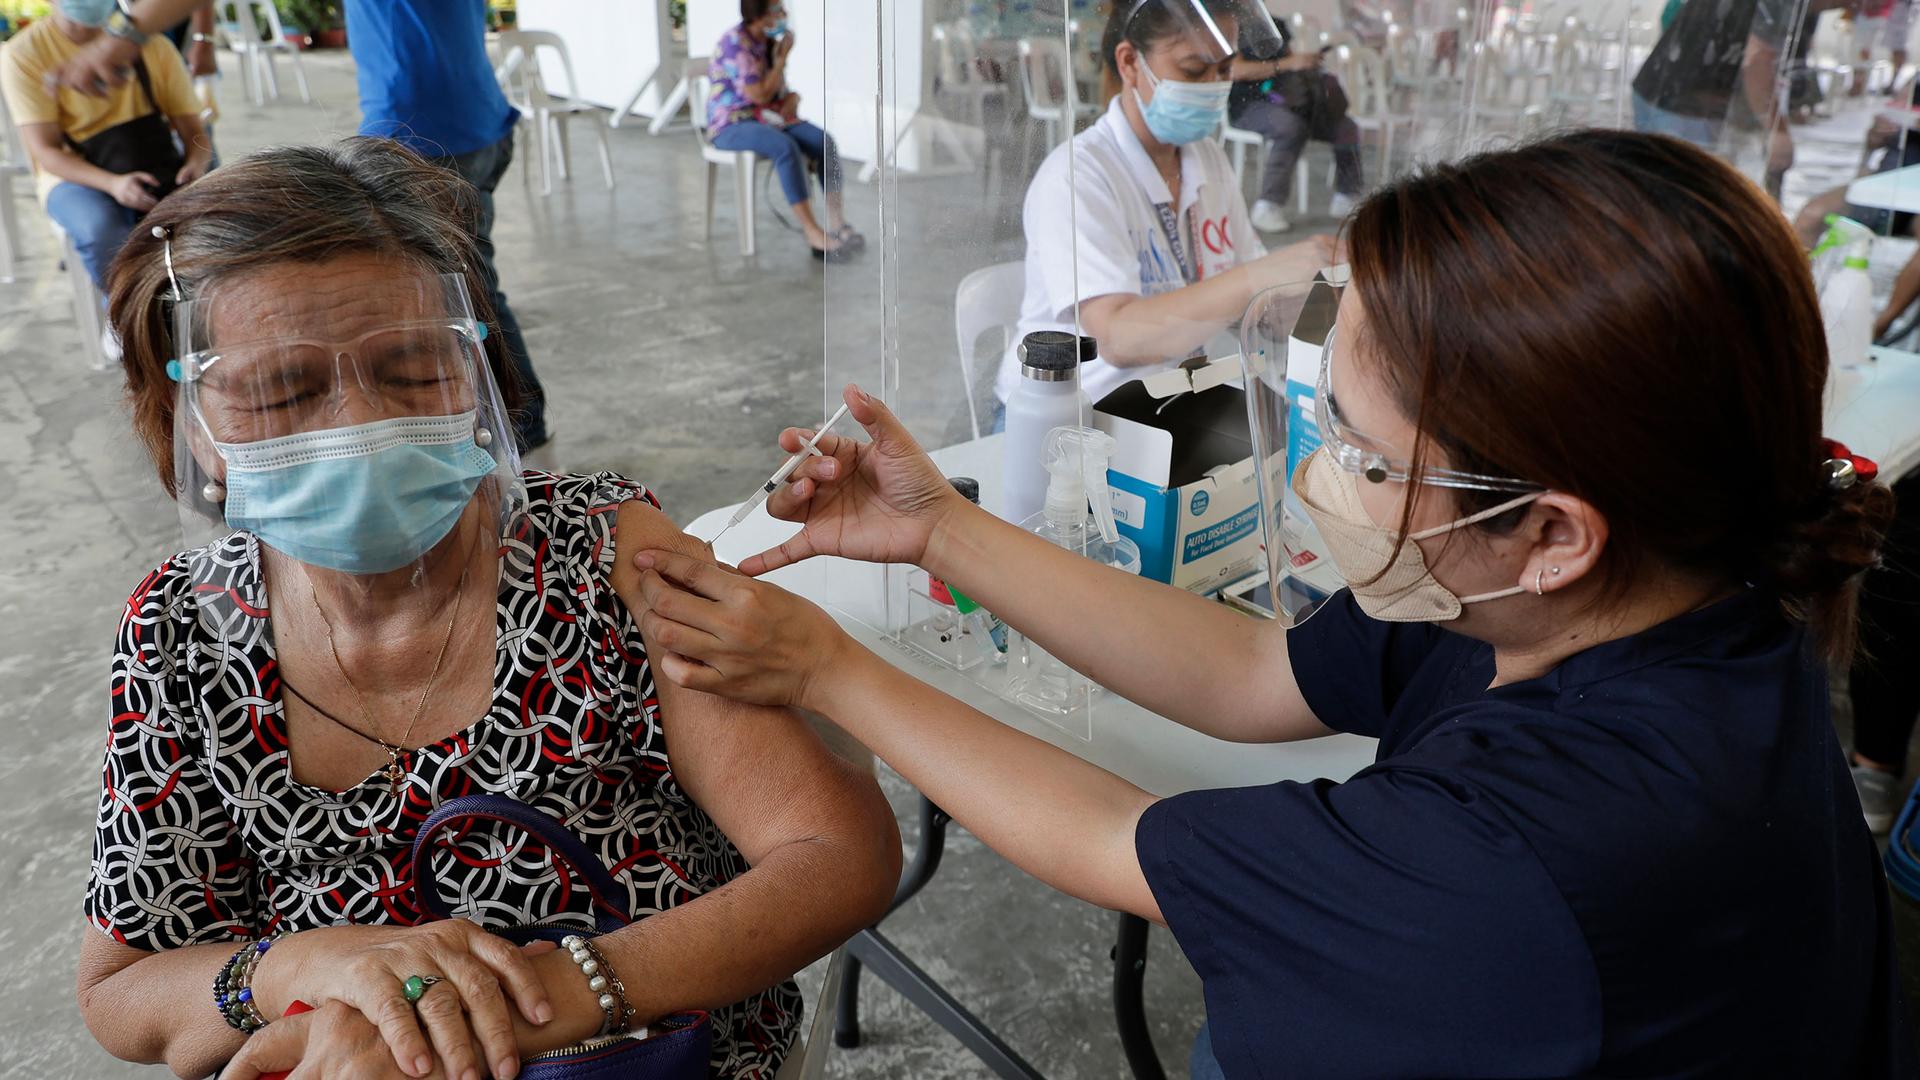 A woman is shown with a clear face shield and face mask while receiving a vaccination shot by a health worker.